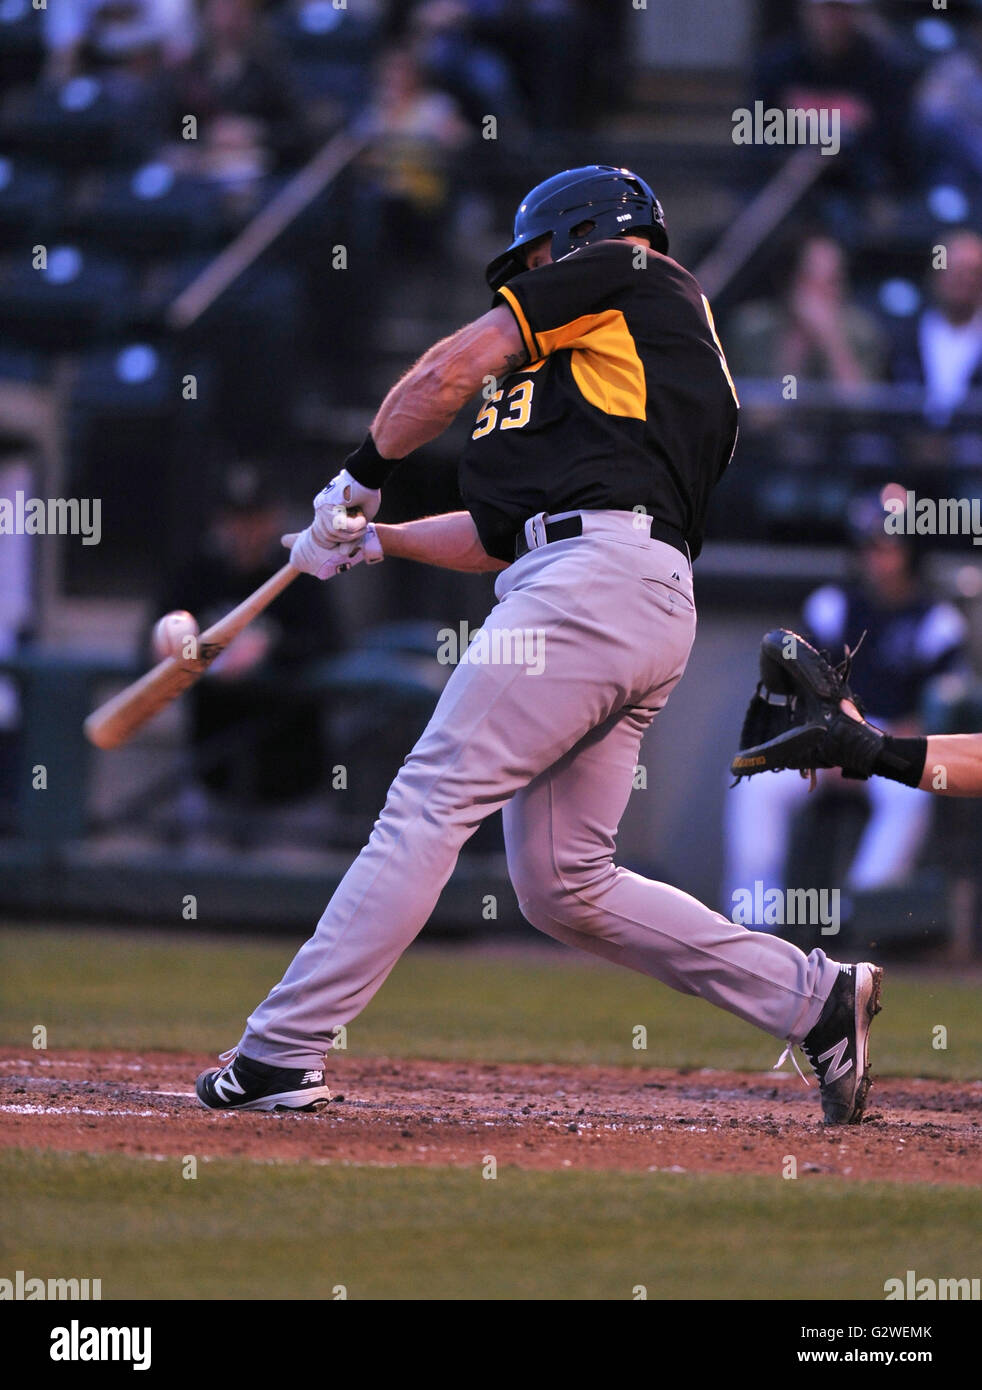 Salt Lake Bees catcher Erik Kratz (53) connects for a base hit in a game against the Tacoma Rainiers. Tacoma won the game 6-1, which was played at Cheney Stadium, Tacoma, WA. Jeff Halstead/Cal Sport Media © Jeff Halstead/CSMedia Stock Photo